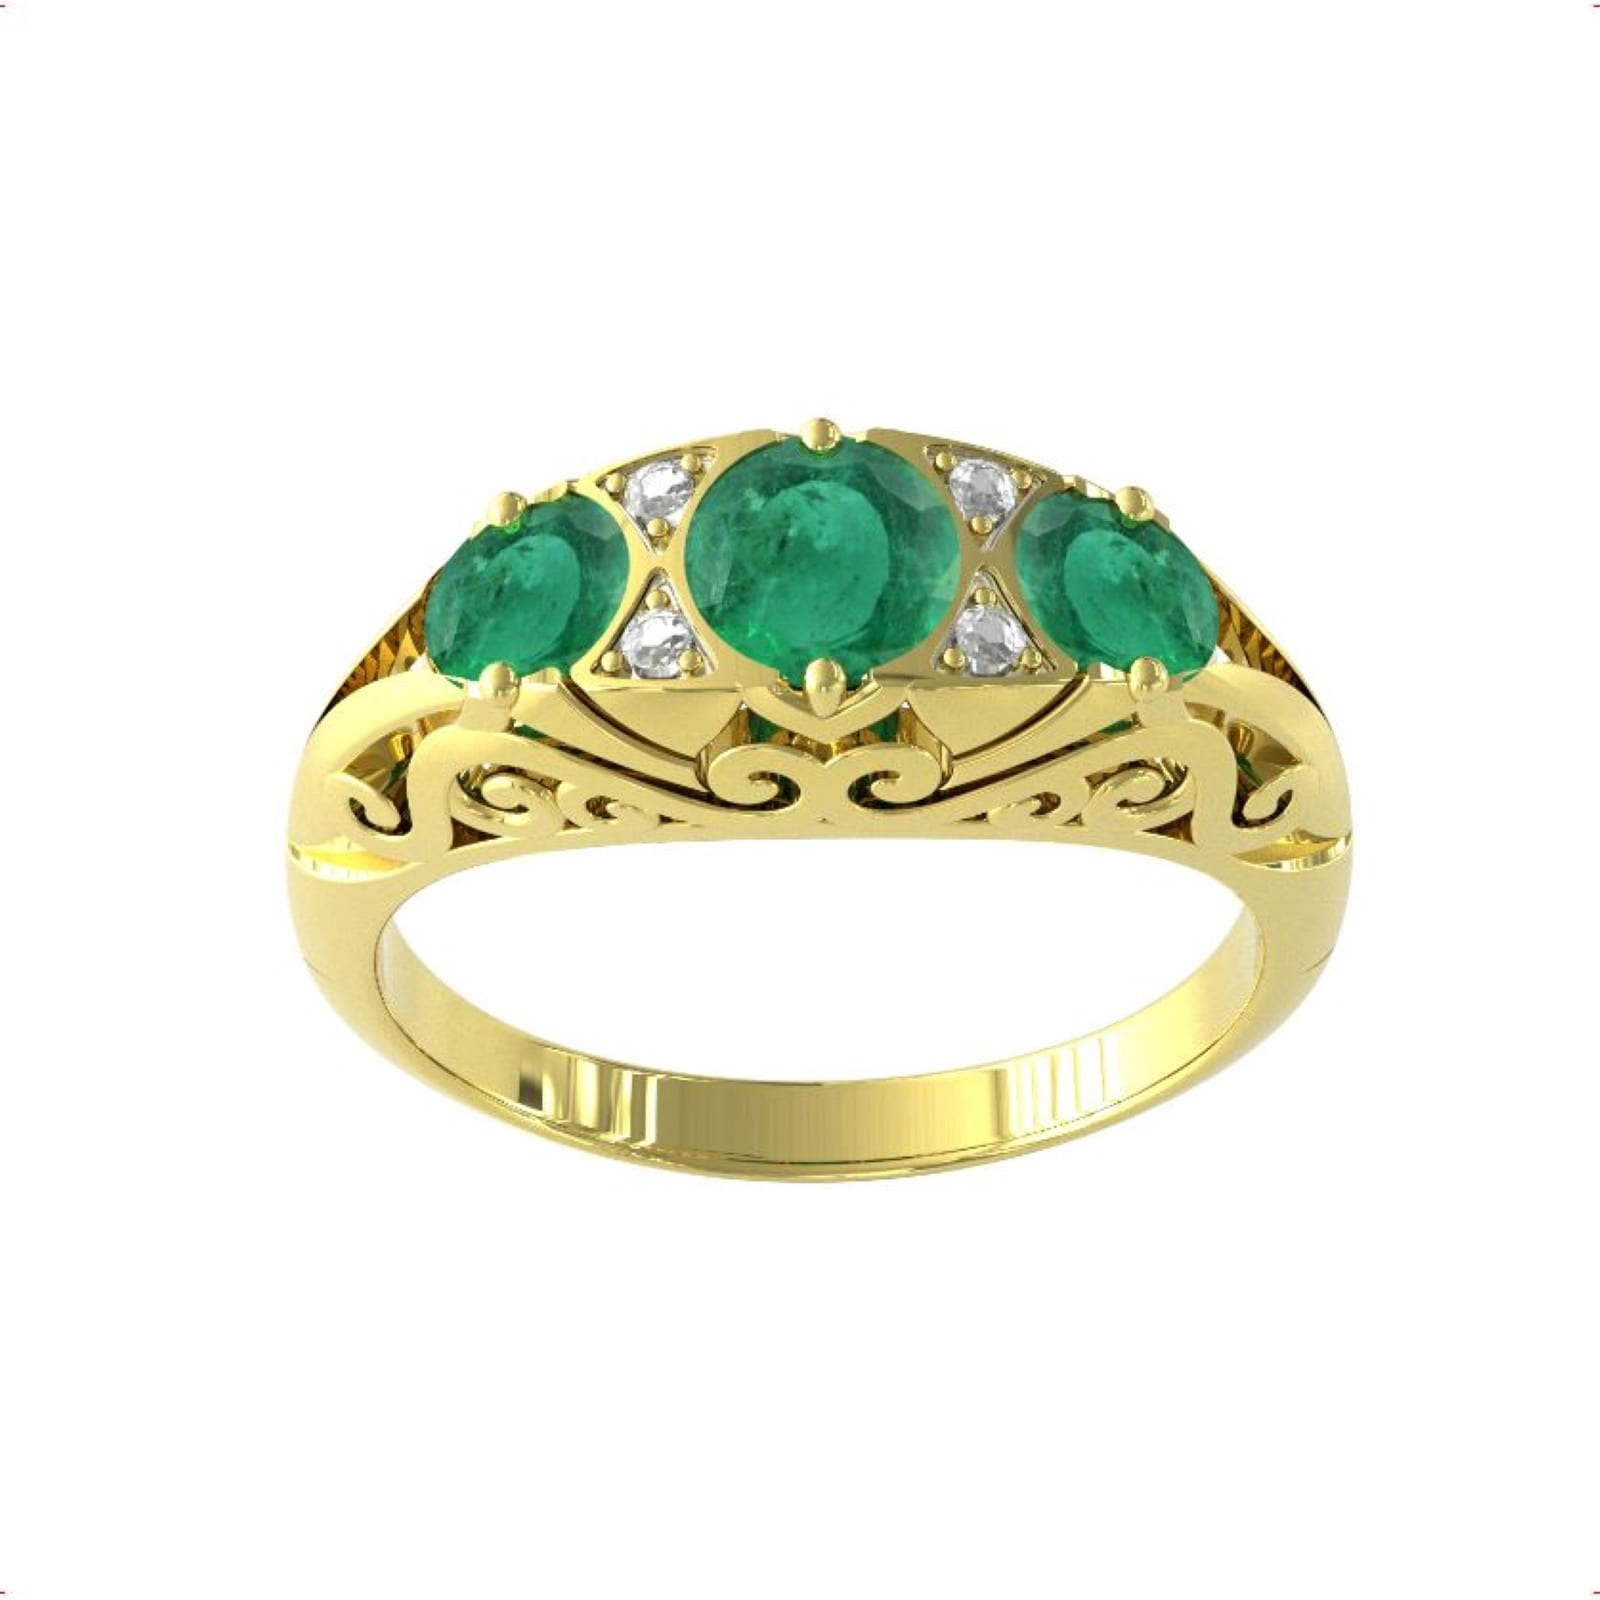 9ct Yellow Gold Victorian Style 3 Stone Emerald & Diamond Ring - Ring Size S.5